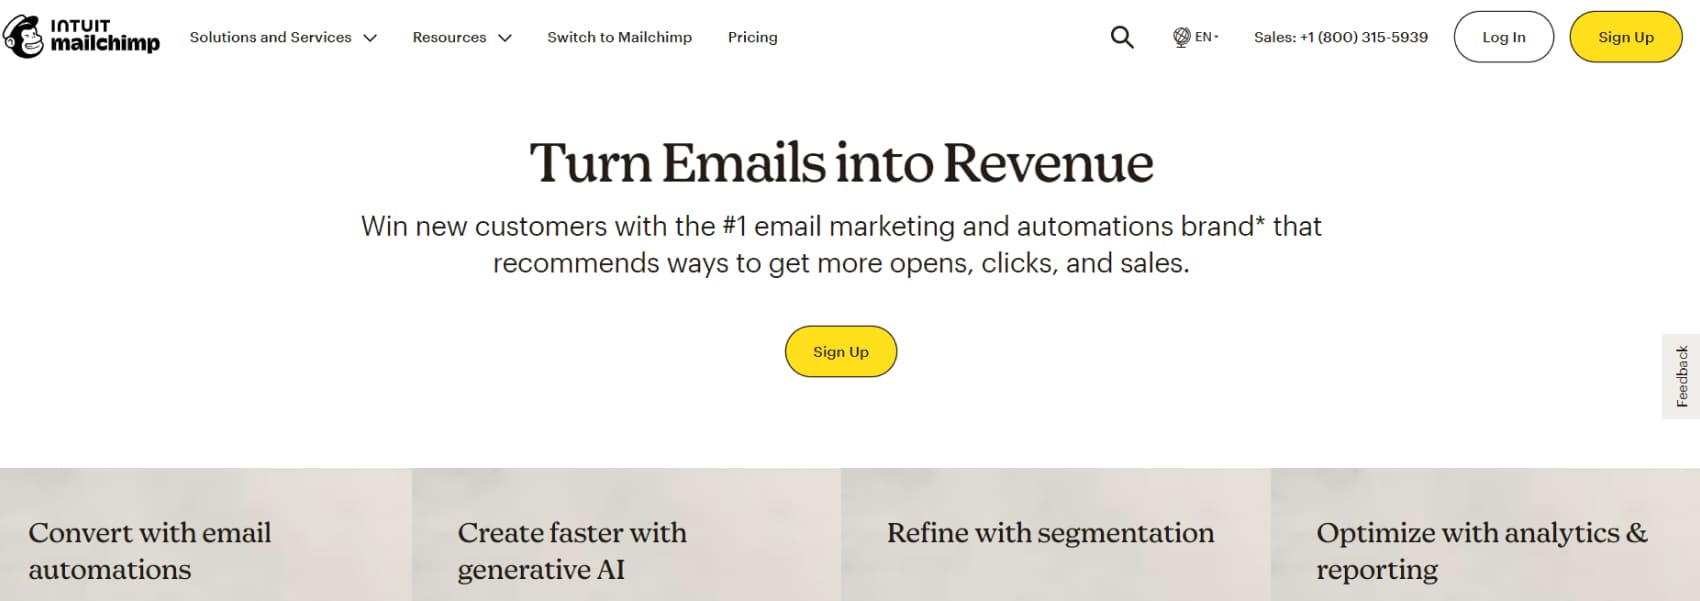 Mailchimp is a tool for inbound marketing